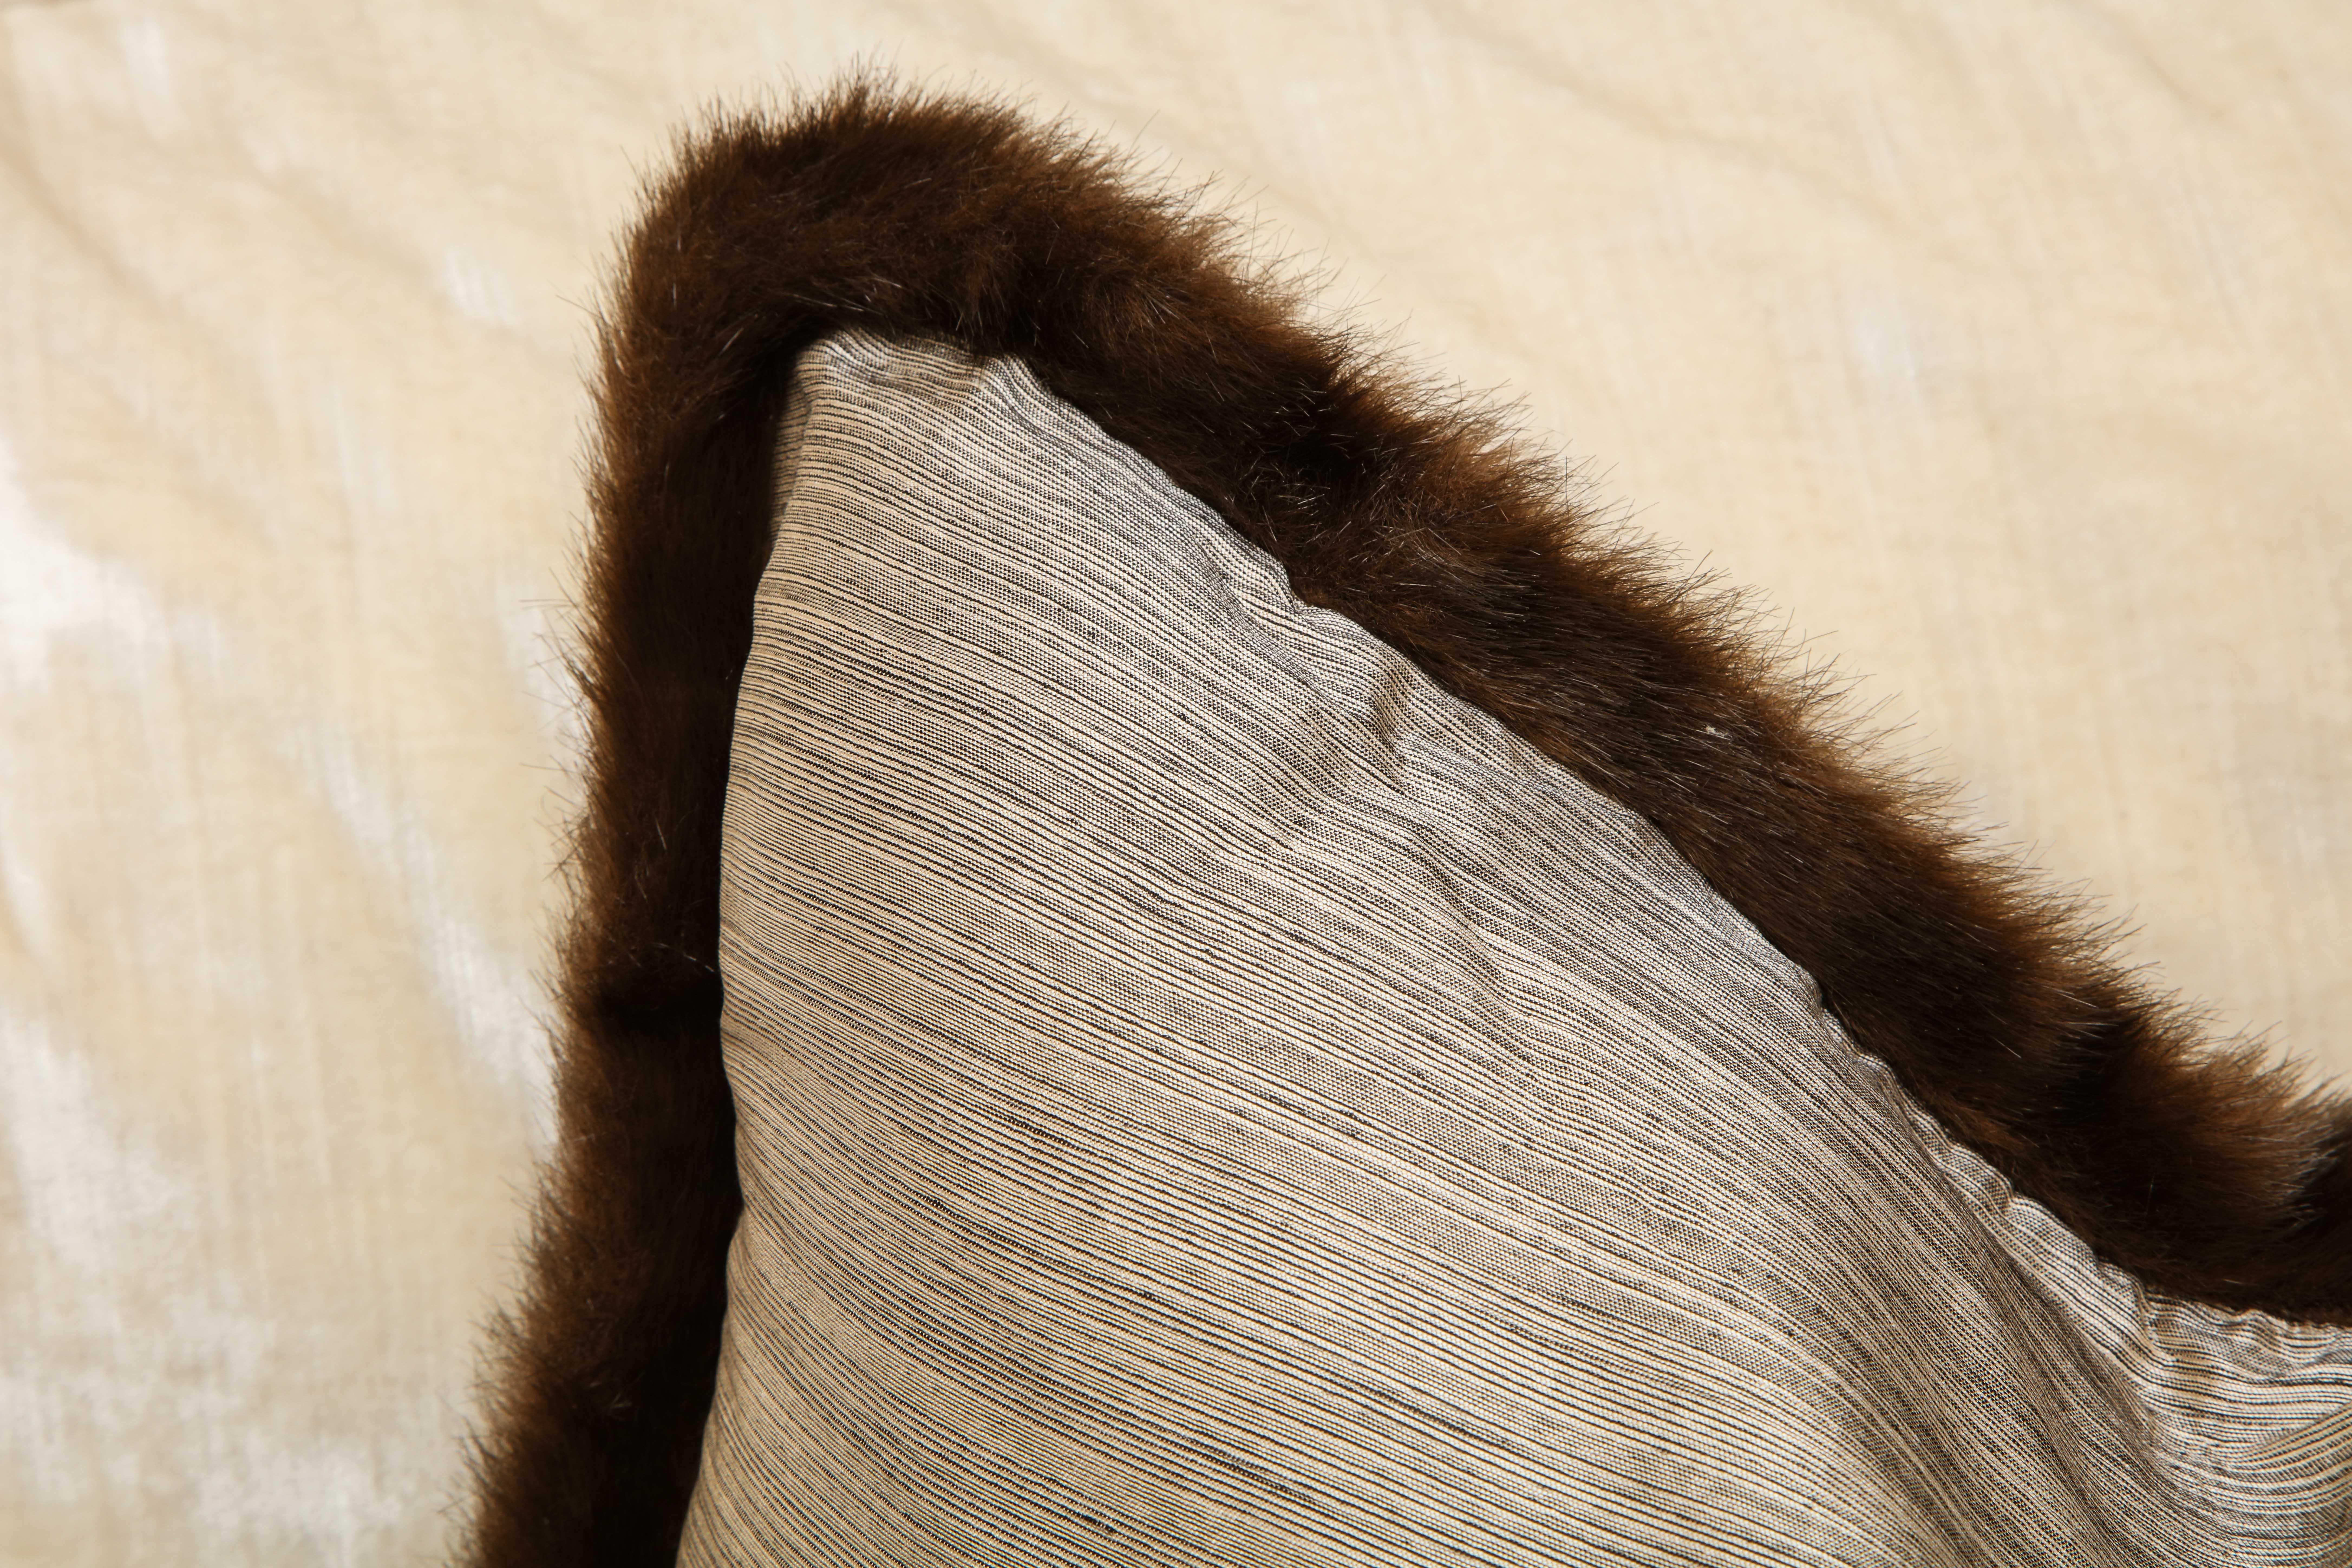 Pair of Silver and Bronze Silk and Fur Anglo-Japanese Pillow For Sale 4